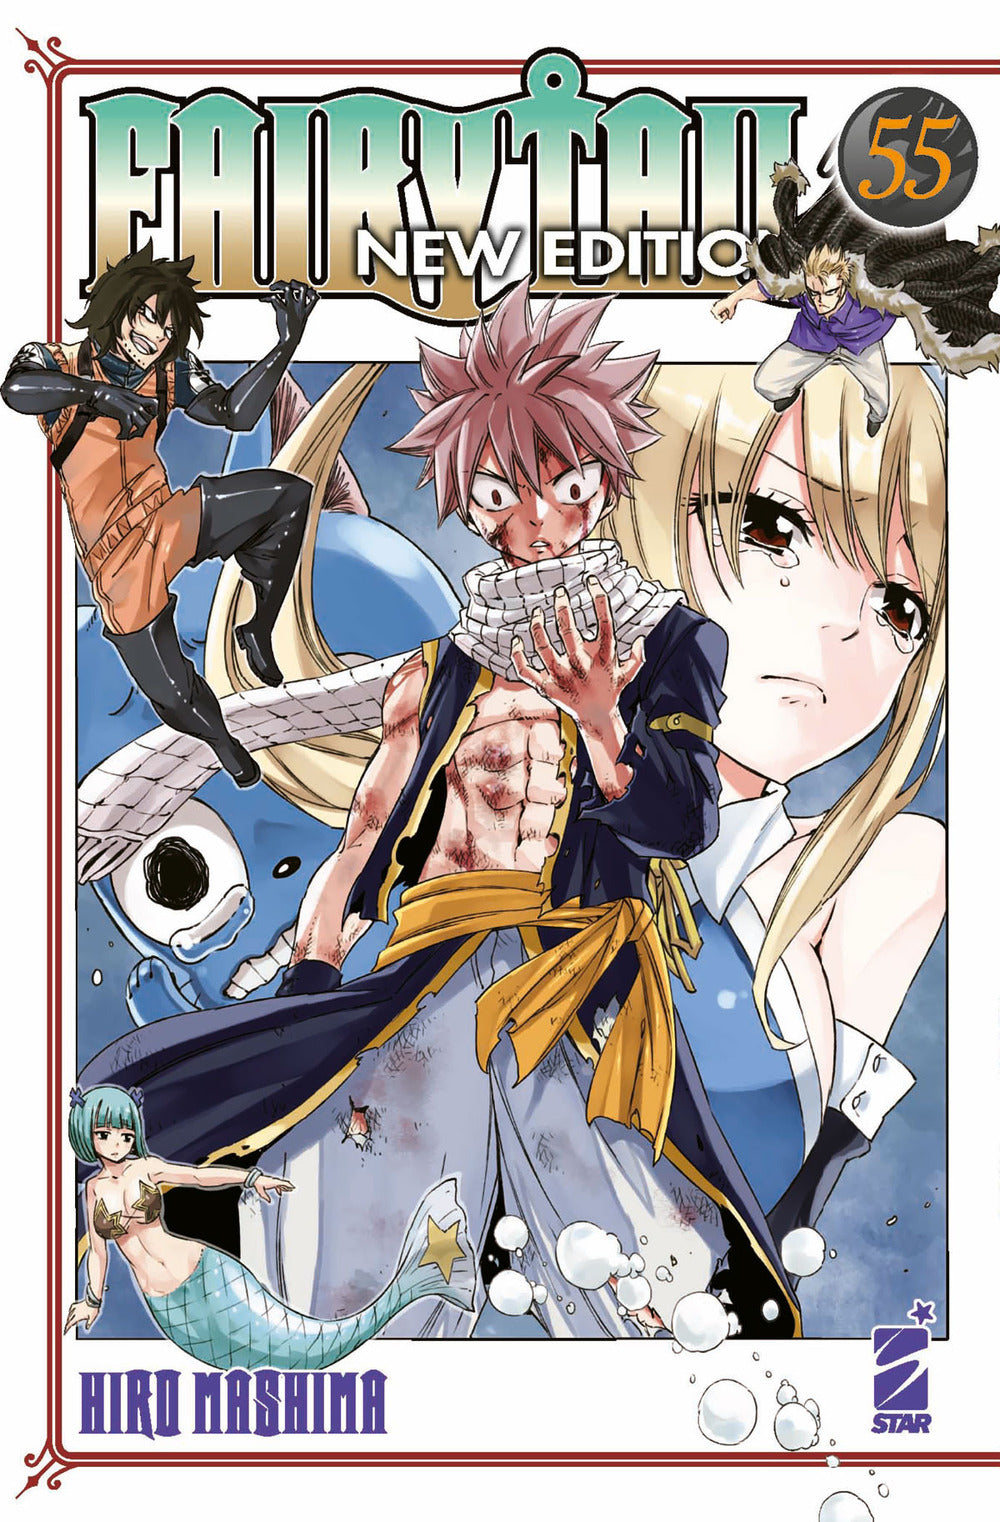 Fairy Tail. New edition. Vol. 55.